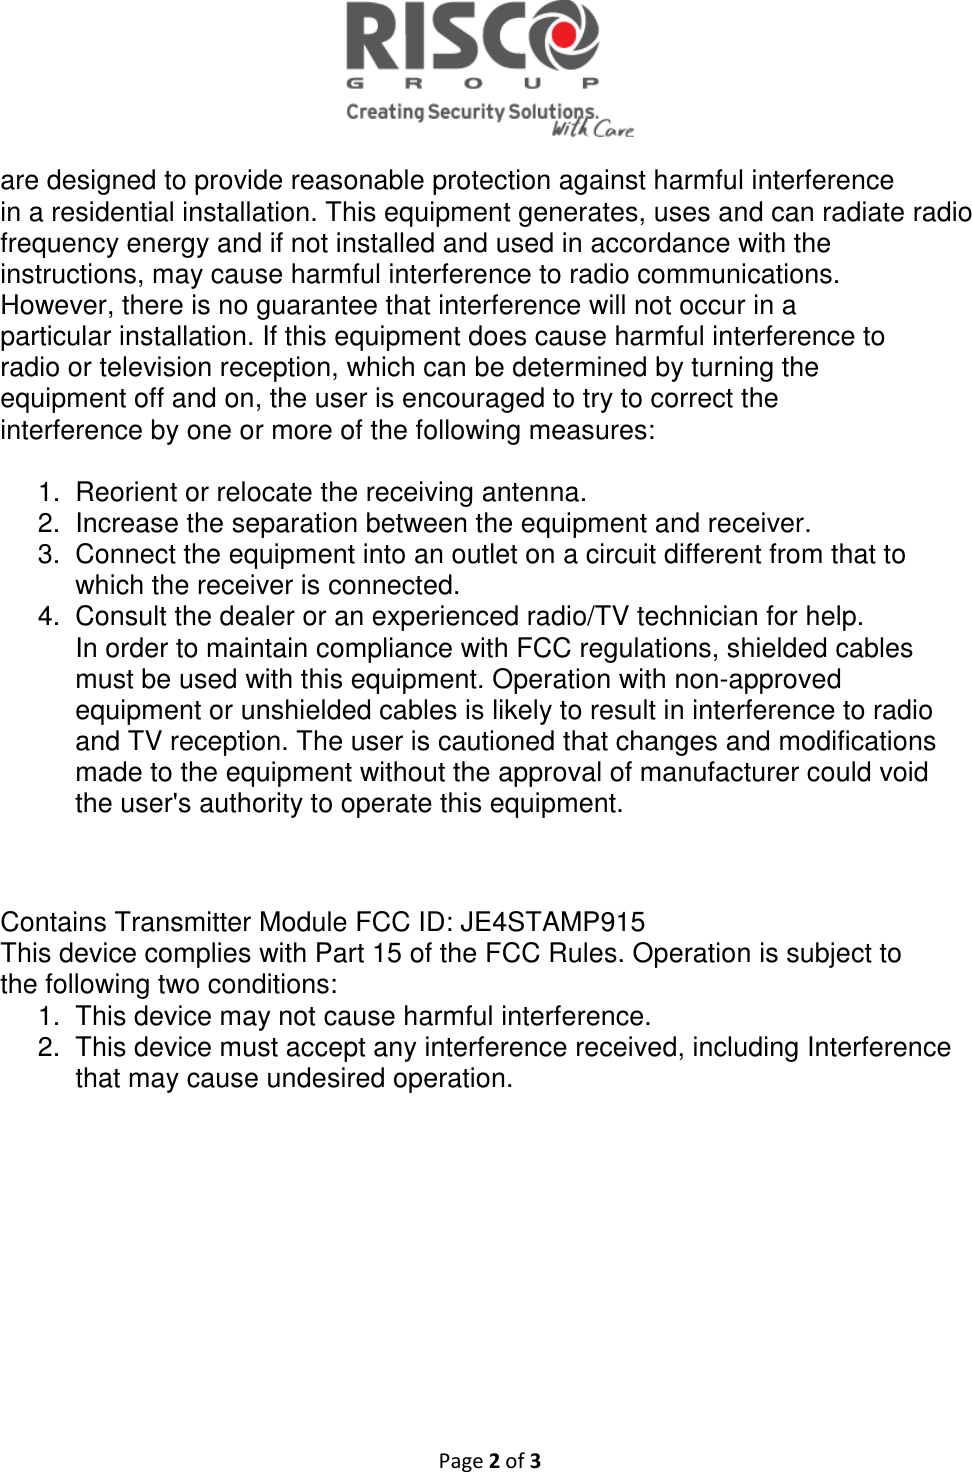   Page 2 of 3  are designed to provide reasonable protection against harmful interference in a residential installation. This equipment generates, uses and can radiate radio frequency energy and if not installed and used in accordance with the instructions, may cause harmful interference to radio communications. However, there is no guarantee that interference will not occur in a particular installation. If this equipment does cause harmful interference to radio or television reception, which can be determined by turning the equipment off and on, the user is encouraged to try to correct the interference by one or more of the following measures:  1.  Reorient or relocate the receiving antenna. 2.  Increase the separation between the equipment and receiver. 3.  Connect the equipment into an outlet on a circuit different from that to which the receiver is connected. 4.  Consult the dealer or an experienced radio/TV technician for help. In order to maintain compliance with FCC regulations, shielded cables must be used with this equipment. Operation with non-approved equipment or unshielded cables is likely to result in interference to radio and TV reception. The user is cautioned that changes and modifications made to the equipment without the approval of manufacturer could void the user&apos;s authority to operate this equipment.   Contains Transmitter Module FCC ID: JE4STAMP915 This device complies with Part 15 of the FCC Rules. Operation is subject to the following two conditions: 1.  This device may not cause harmful interference. 2.  This device must accept any interference received, including Interference that may cause undesired operation.     